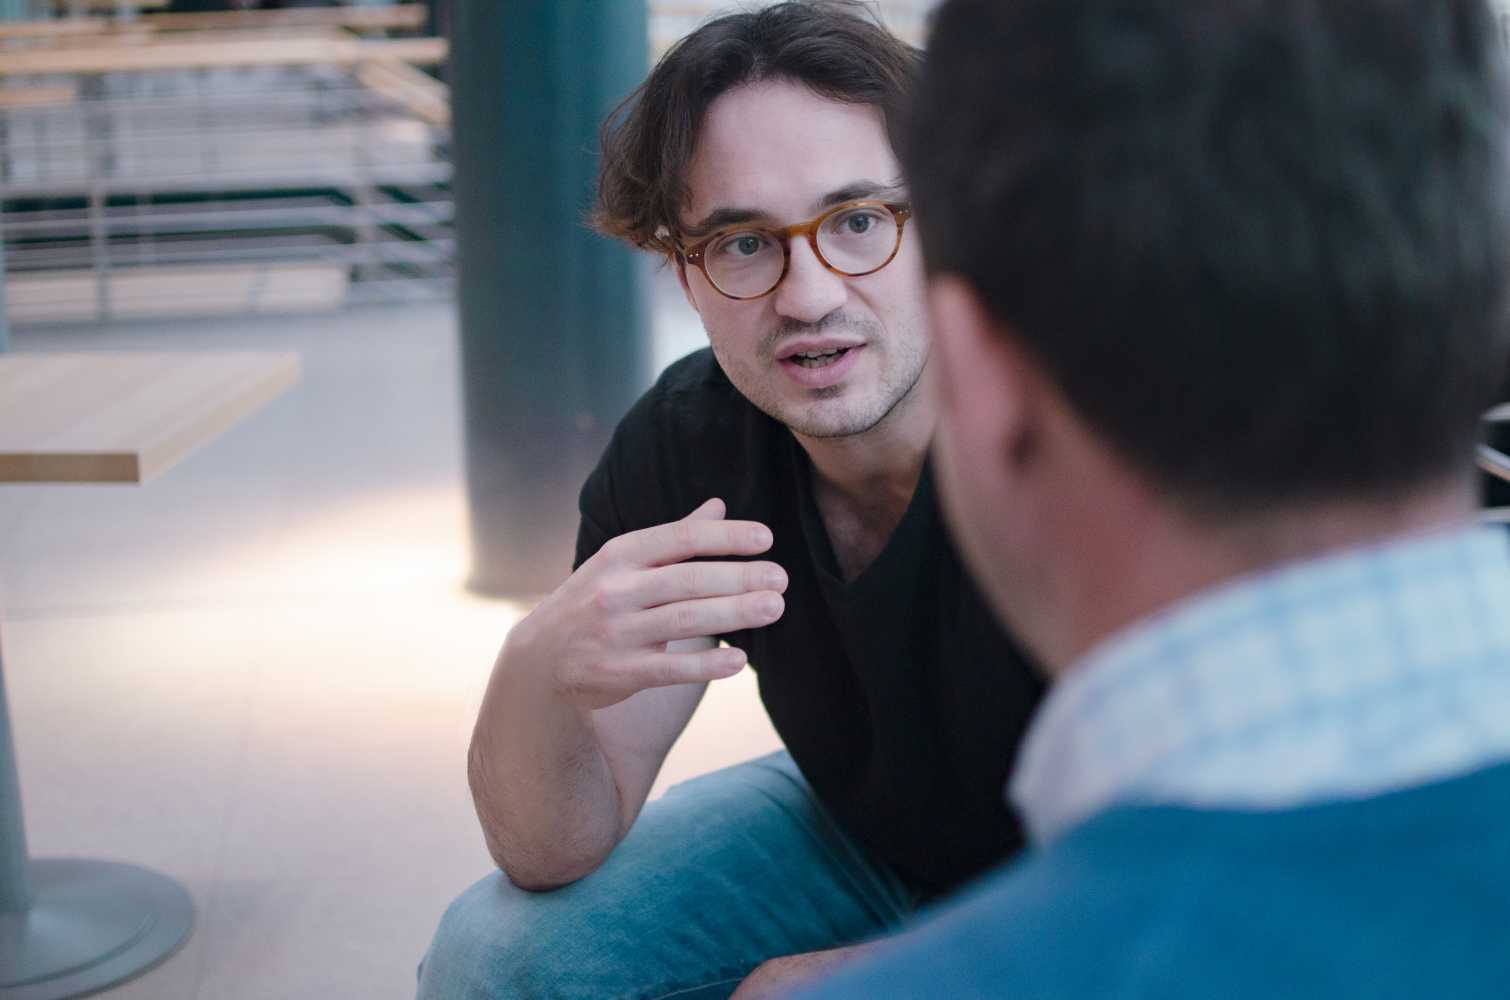 Man with glasses in the background is talking to a person in the foreground